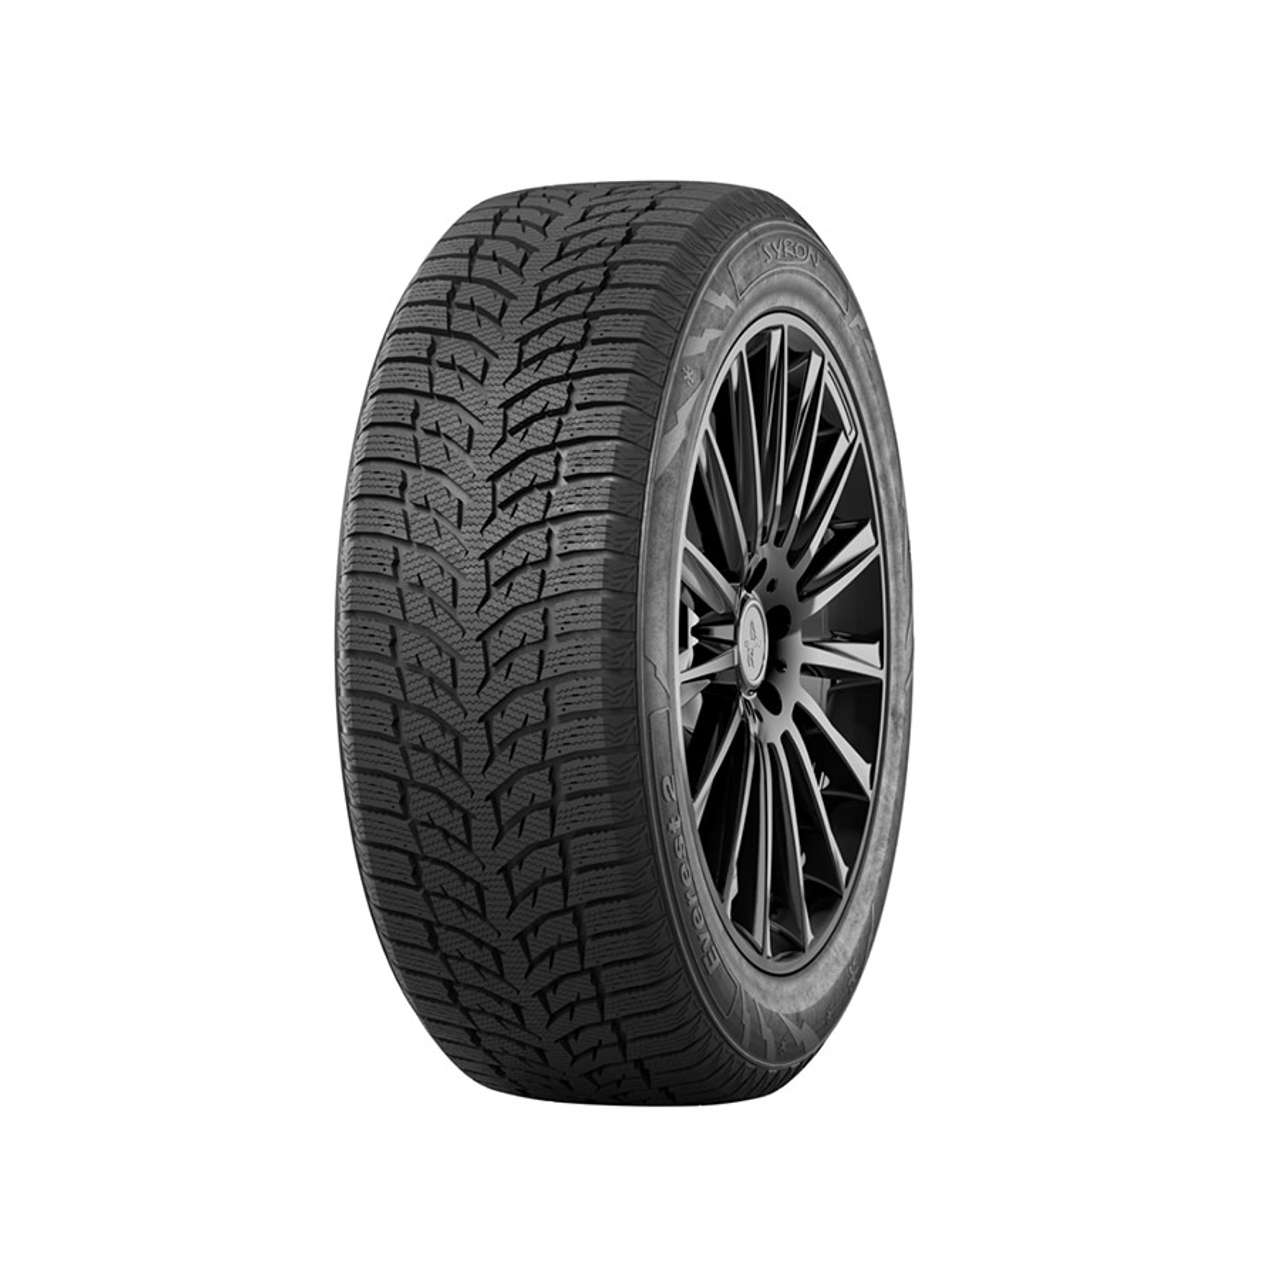 SYRON EVEREST 2 225/55R16 95H BSW